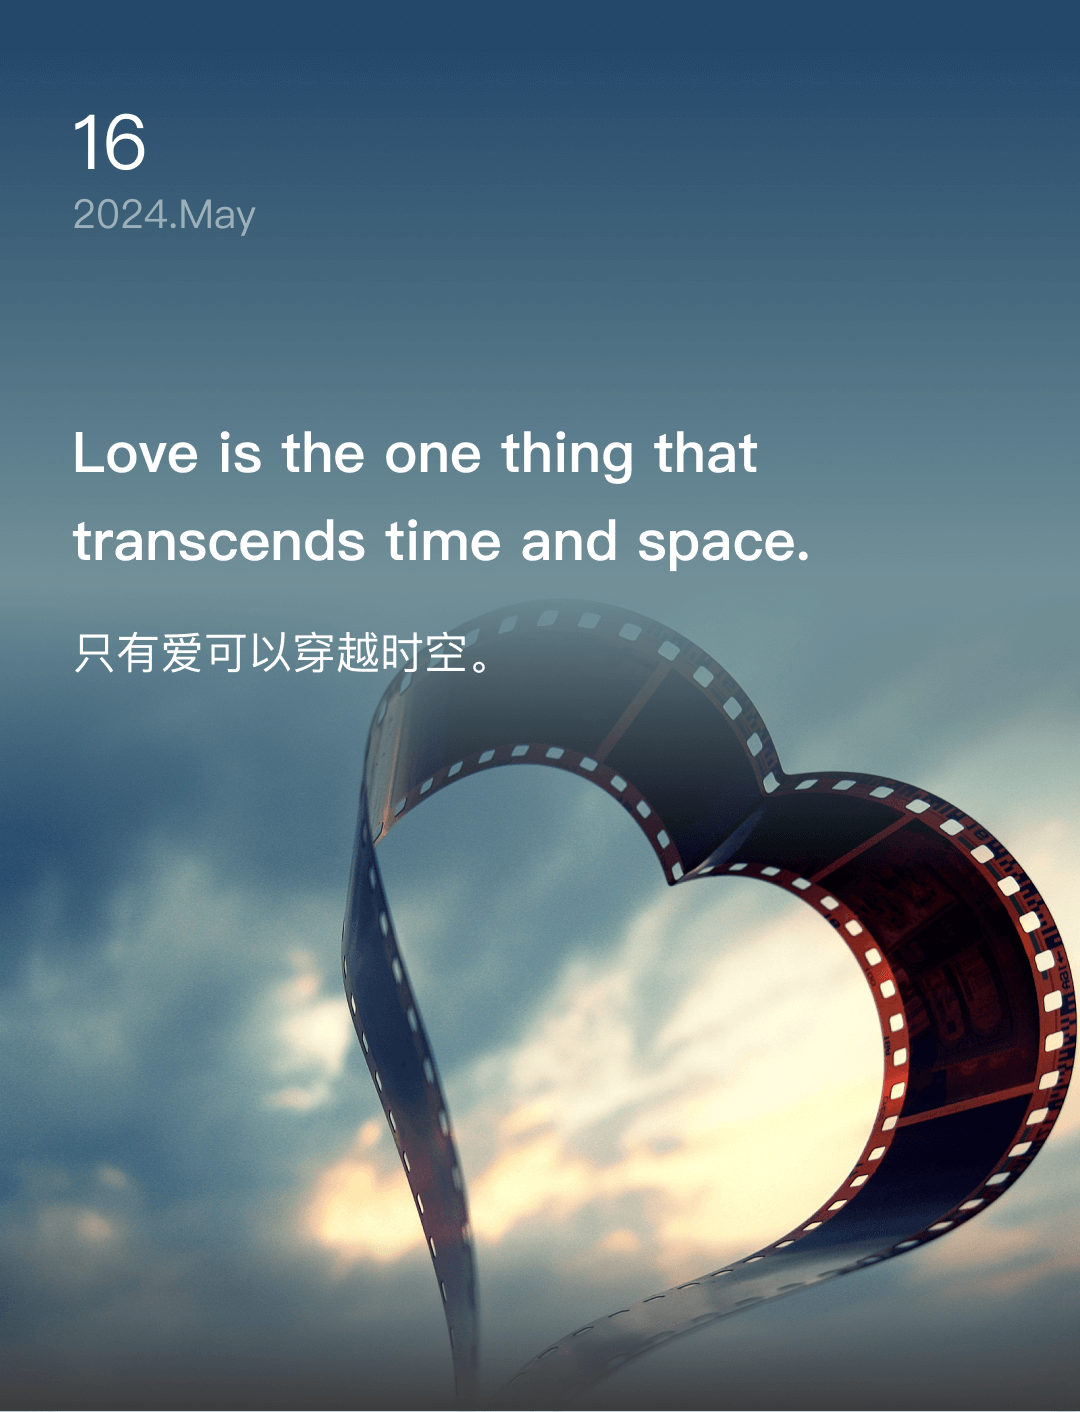 Love is the one thing that transcends time and space.